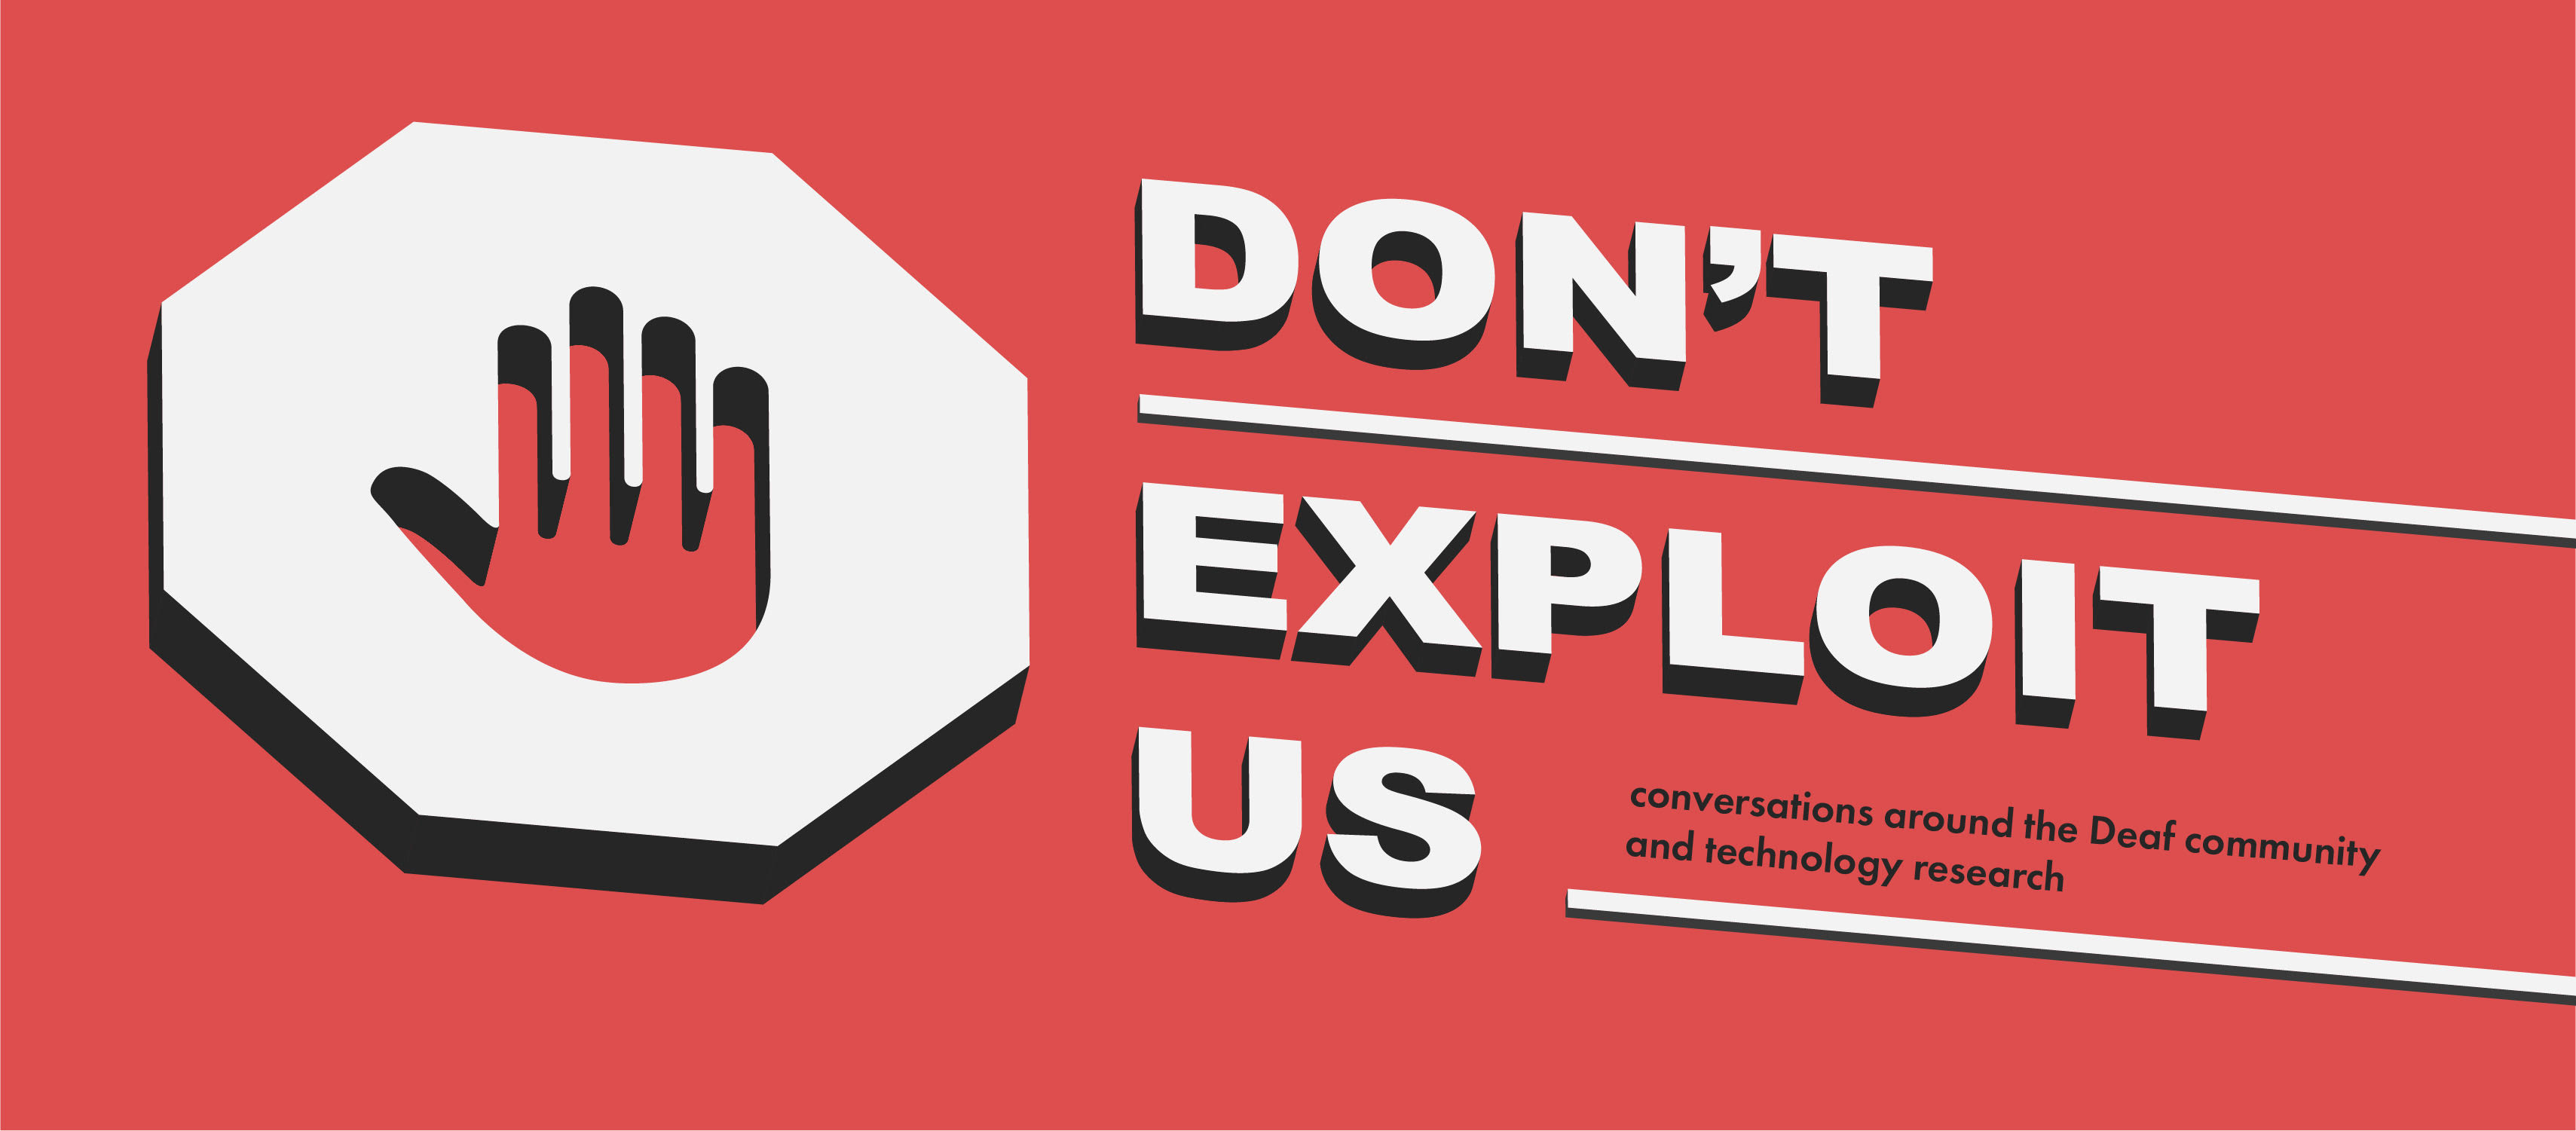 3-dimensional white stop sign with a hand inside it, and 3-dimensional white text that reads "DON'T EXPLOIT US" on a red background. Subtitle reads "conversations around the Deaf community and technology research" in black